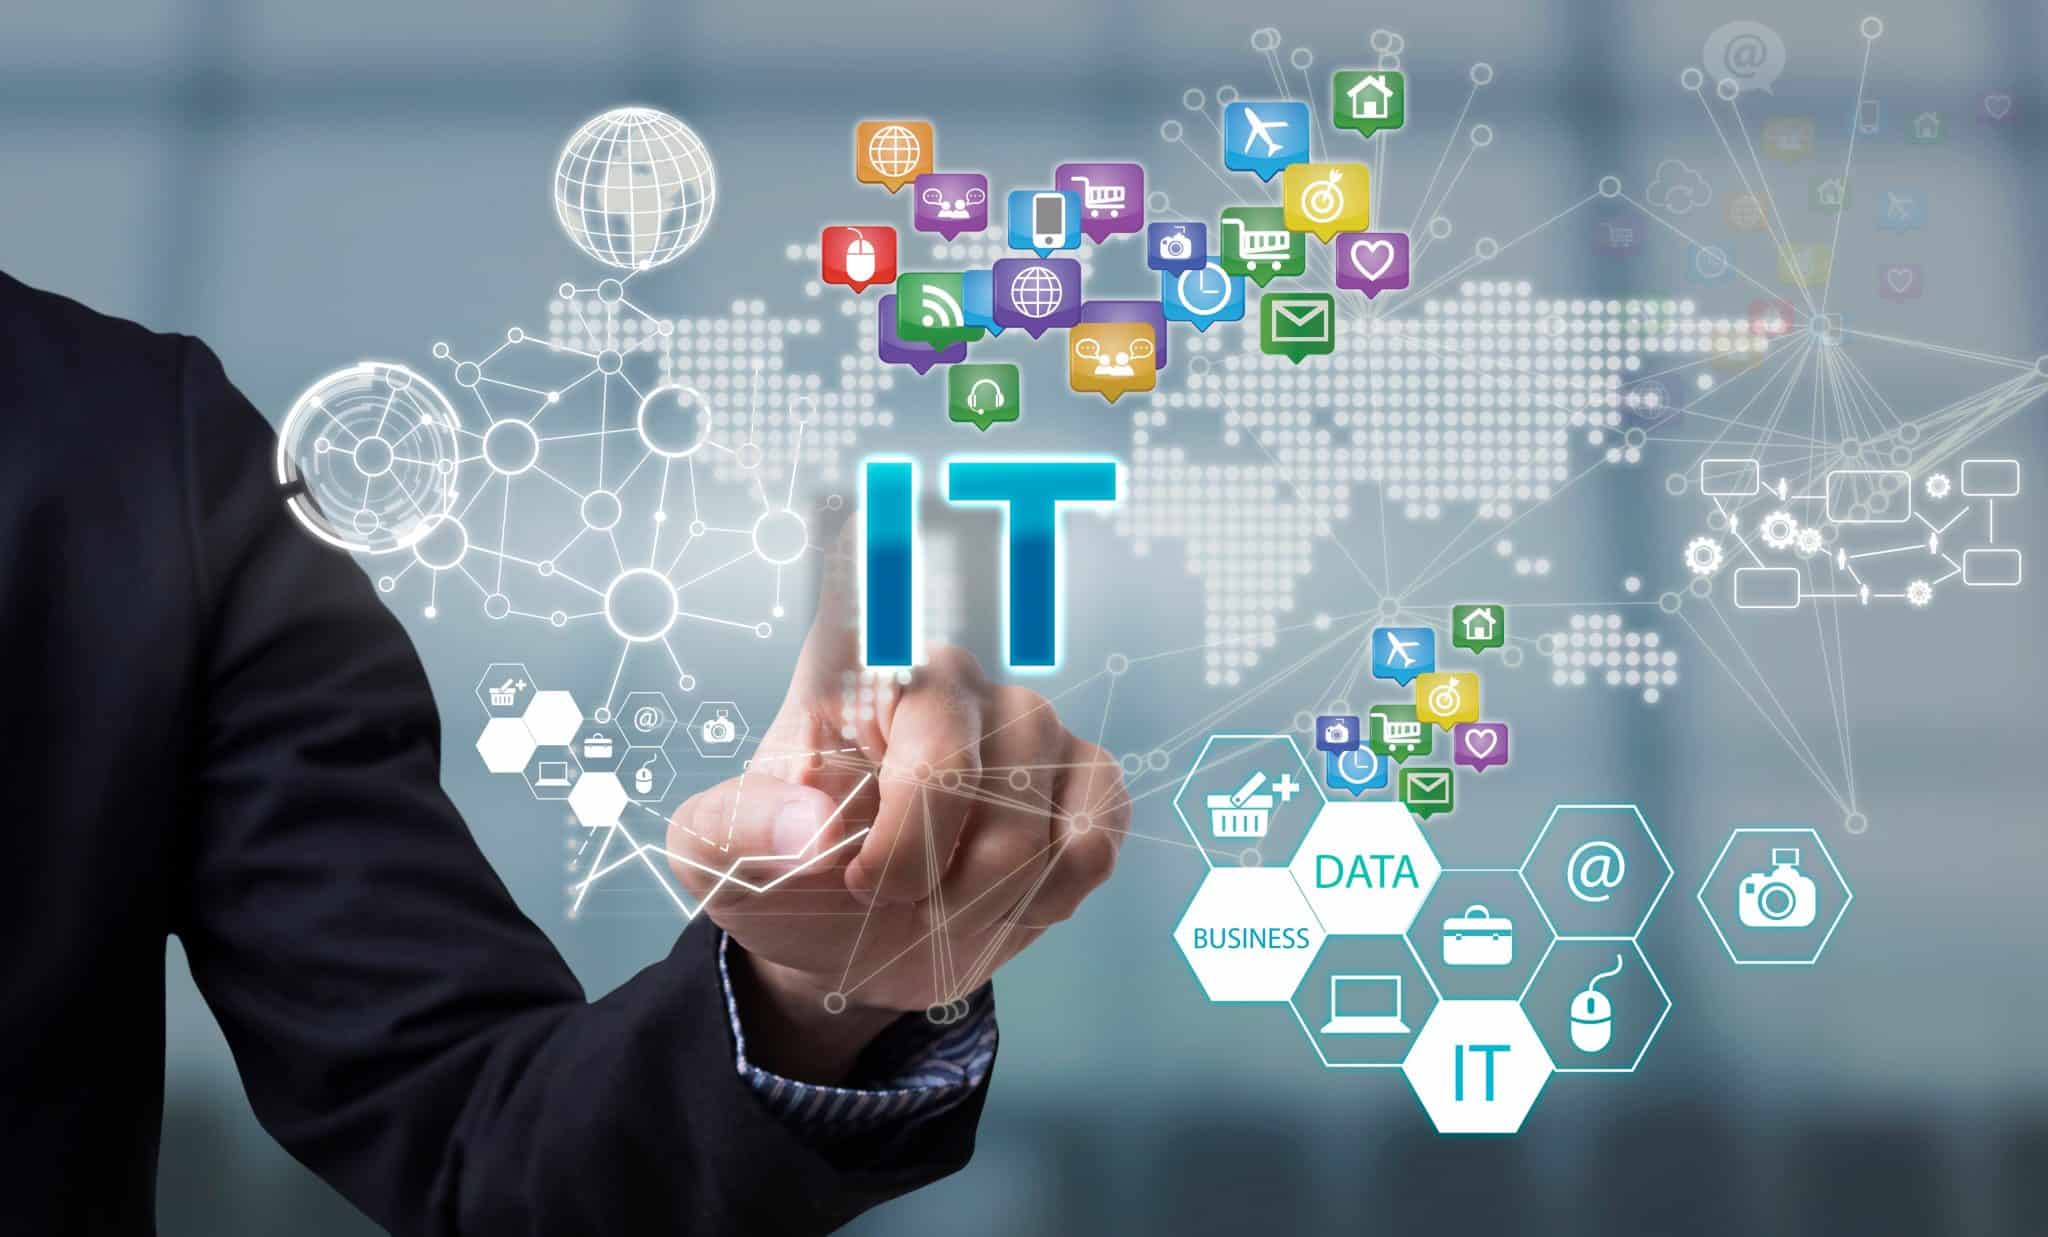 How We Can Help Achieve IT Success” with AdvancedTechCo as the IT support company